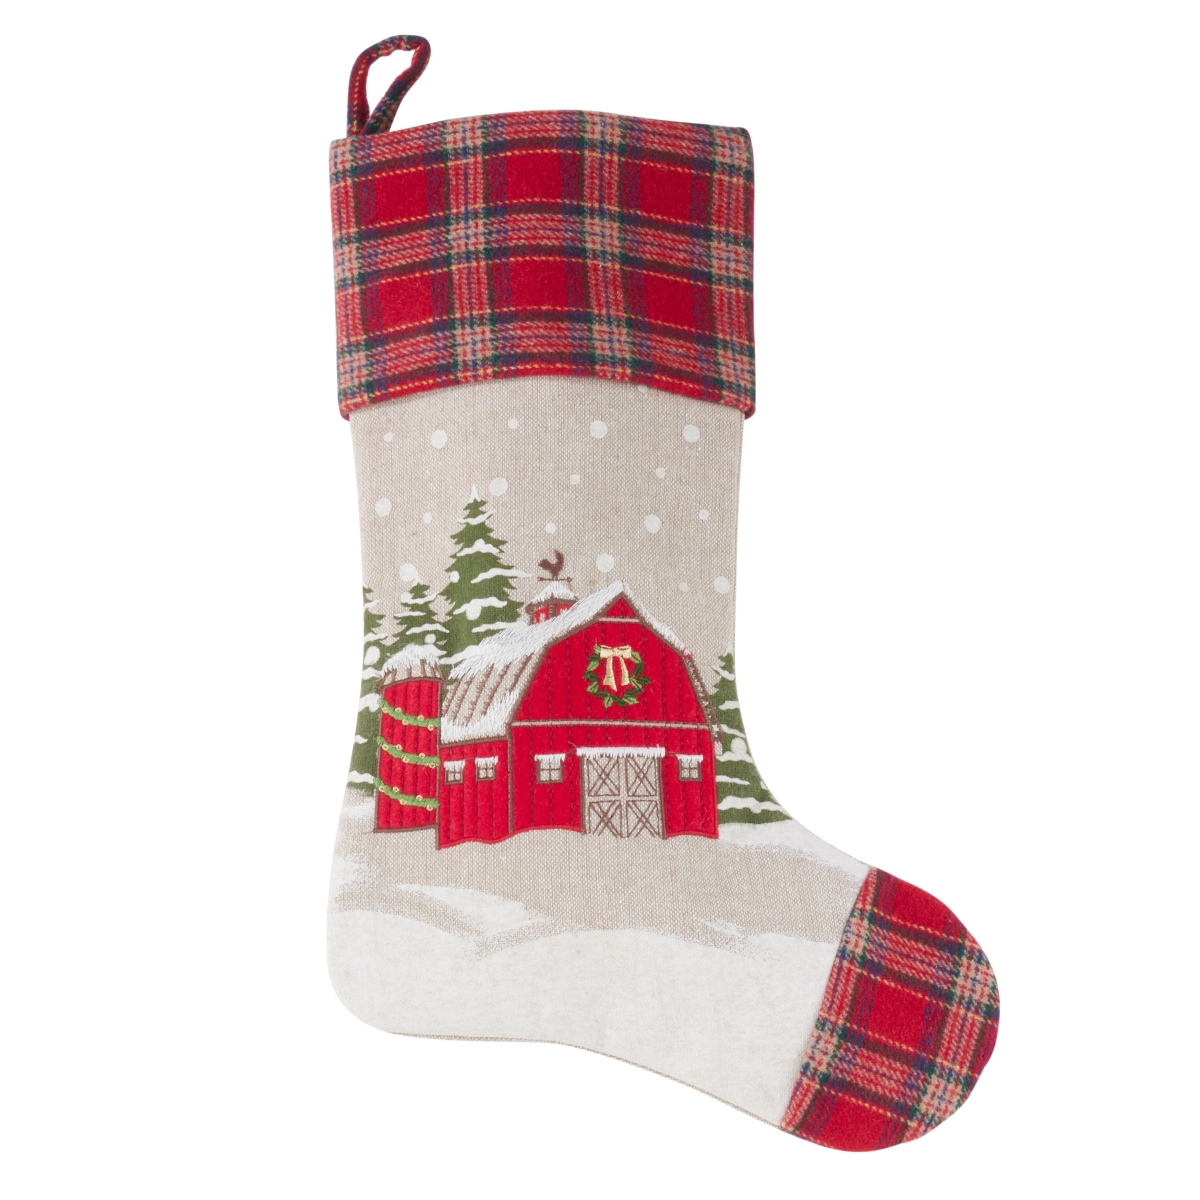 7753.m1620 16 X 20 In. Christmas Stocking With Holiday Barn Design & Red Plaid Border - Multi Color, Set Of 4